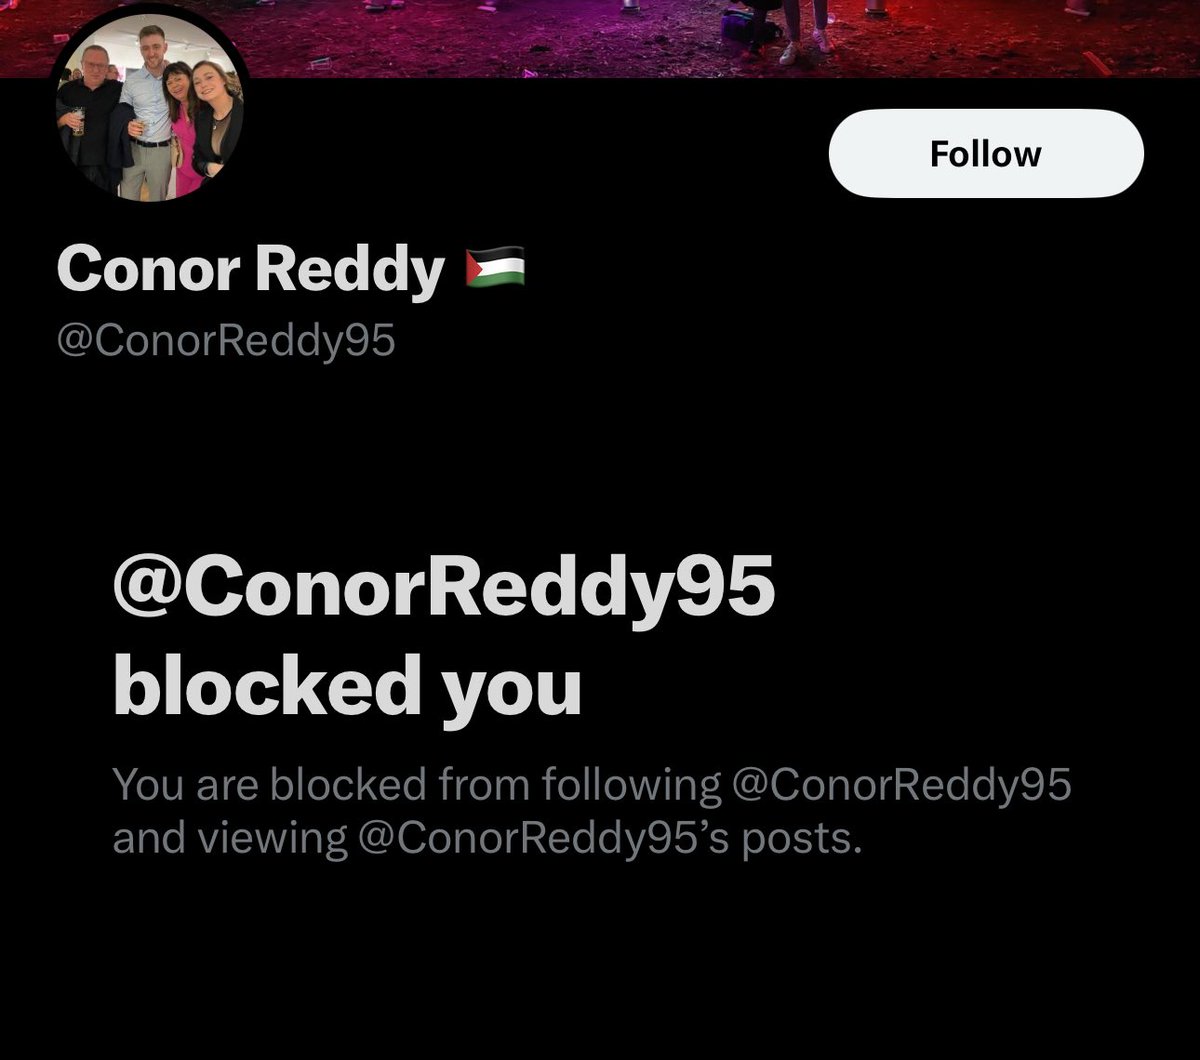 I asked Conor reddy of PBP were illegal migrants welcome at the protest in Trinity and he blocked me. 

Seems they’re not #RefugeesWelcome anymore. 

#IrelandBelongsToTheIrish